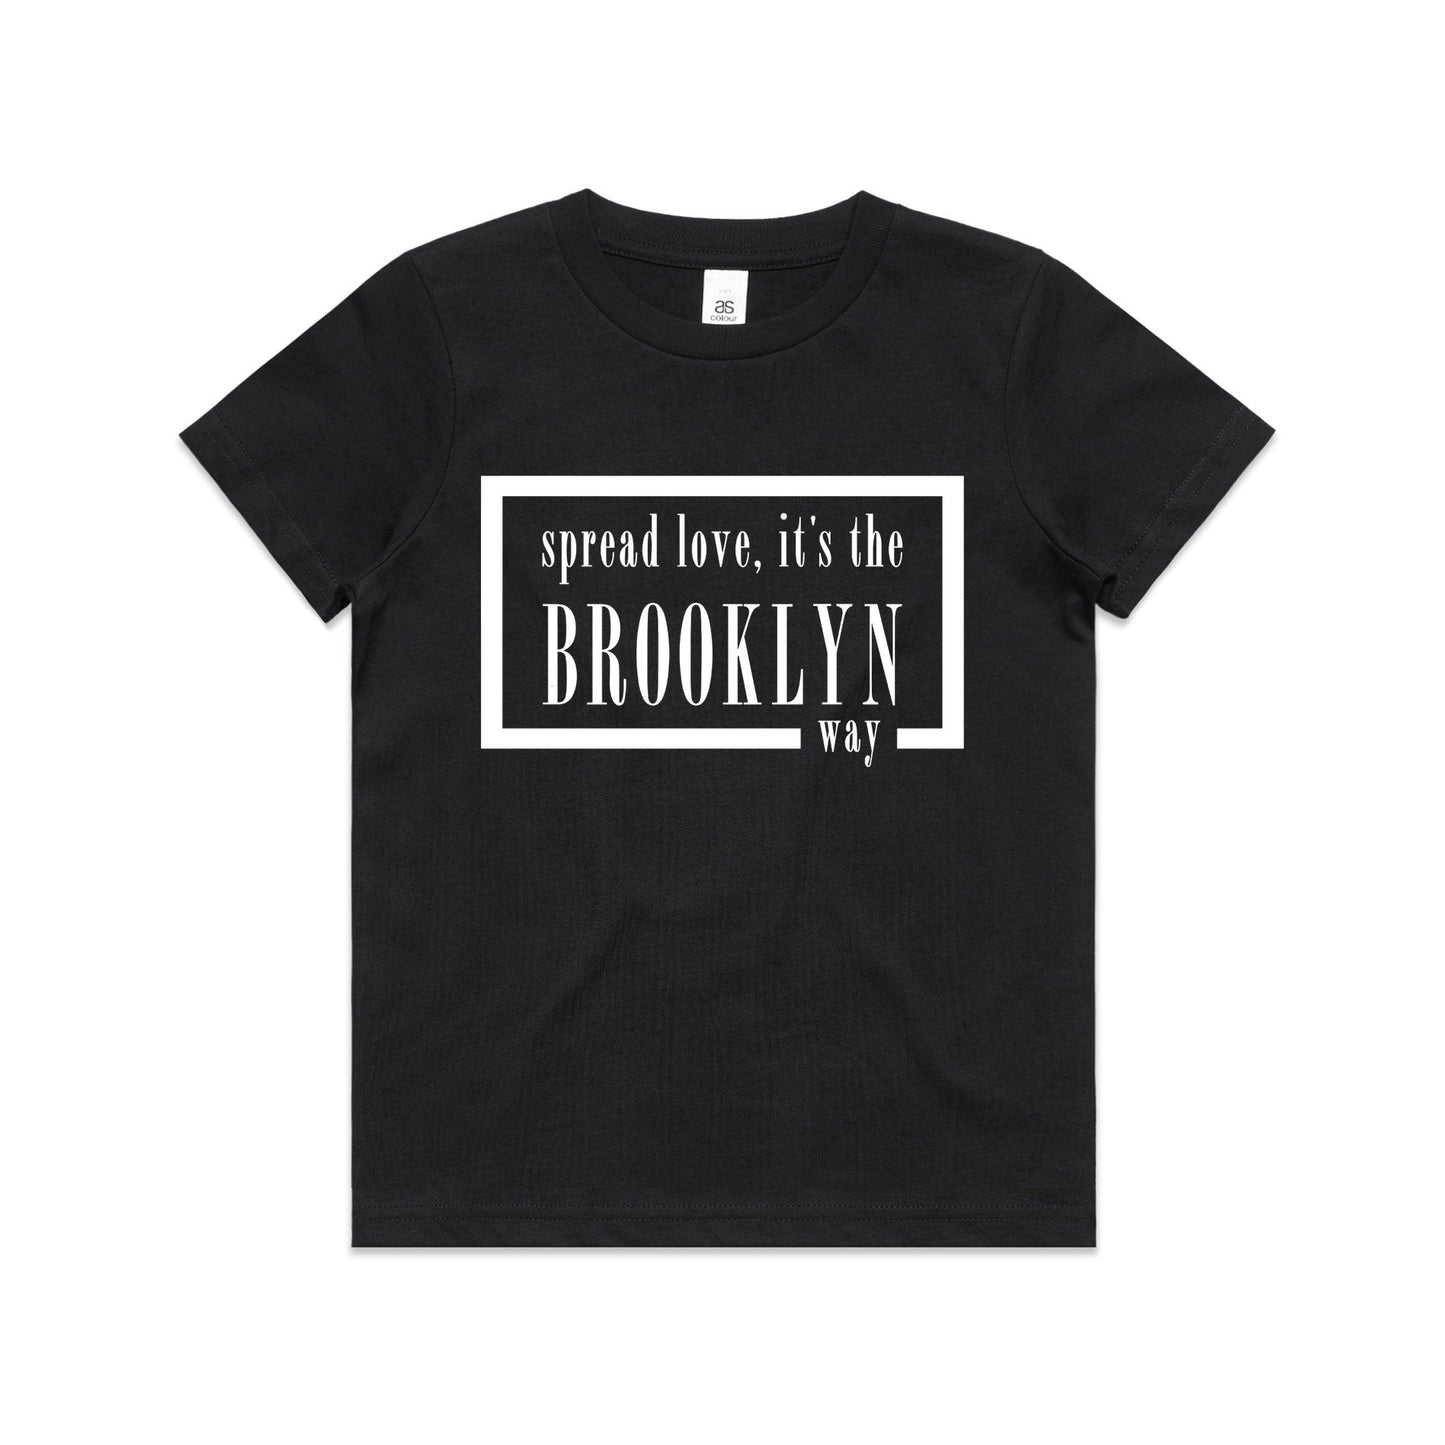 Black t-shirt with white writing that says spread love, its the Brooklyn way. Surrounded by a solid white box